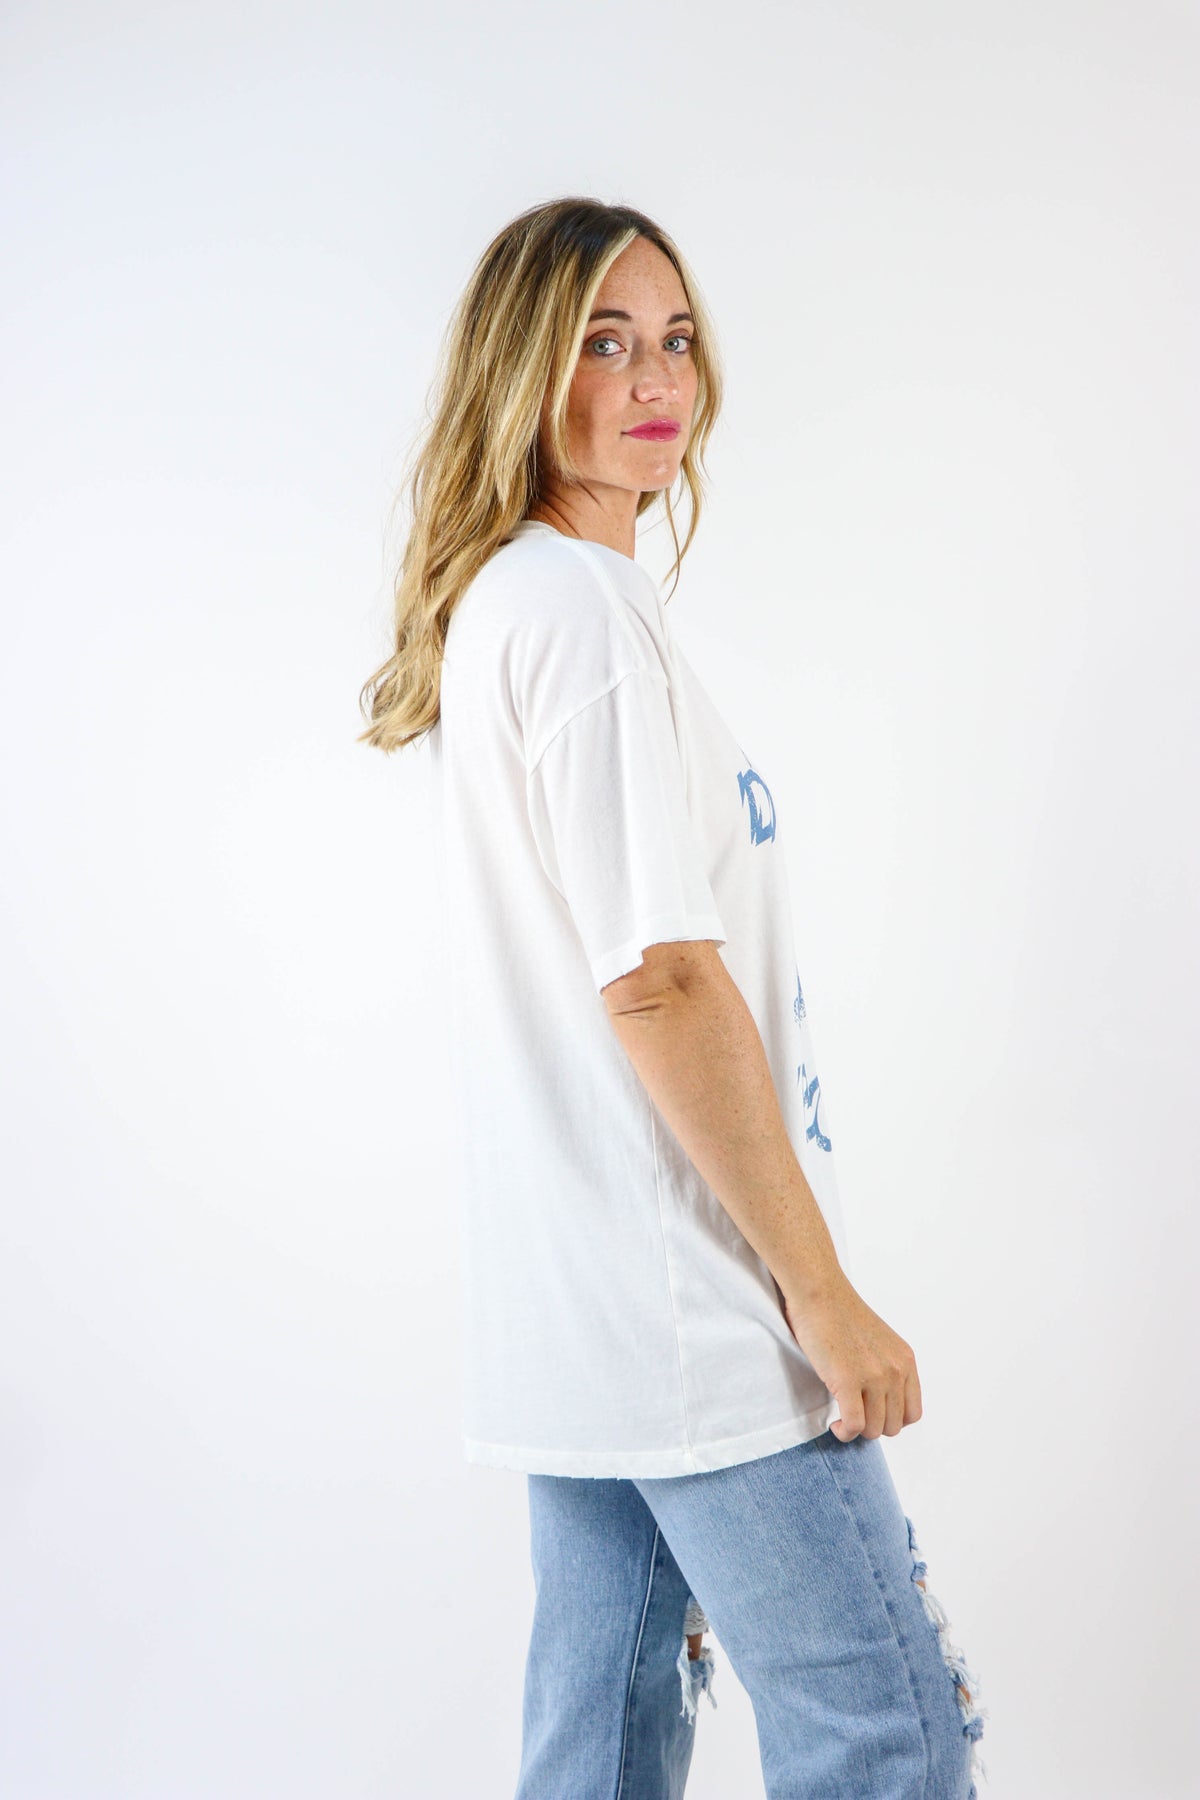 Promesa | Dancing Boots Graphic Tee | Sweetest Stitch Boutique